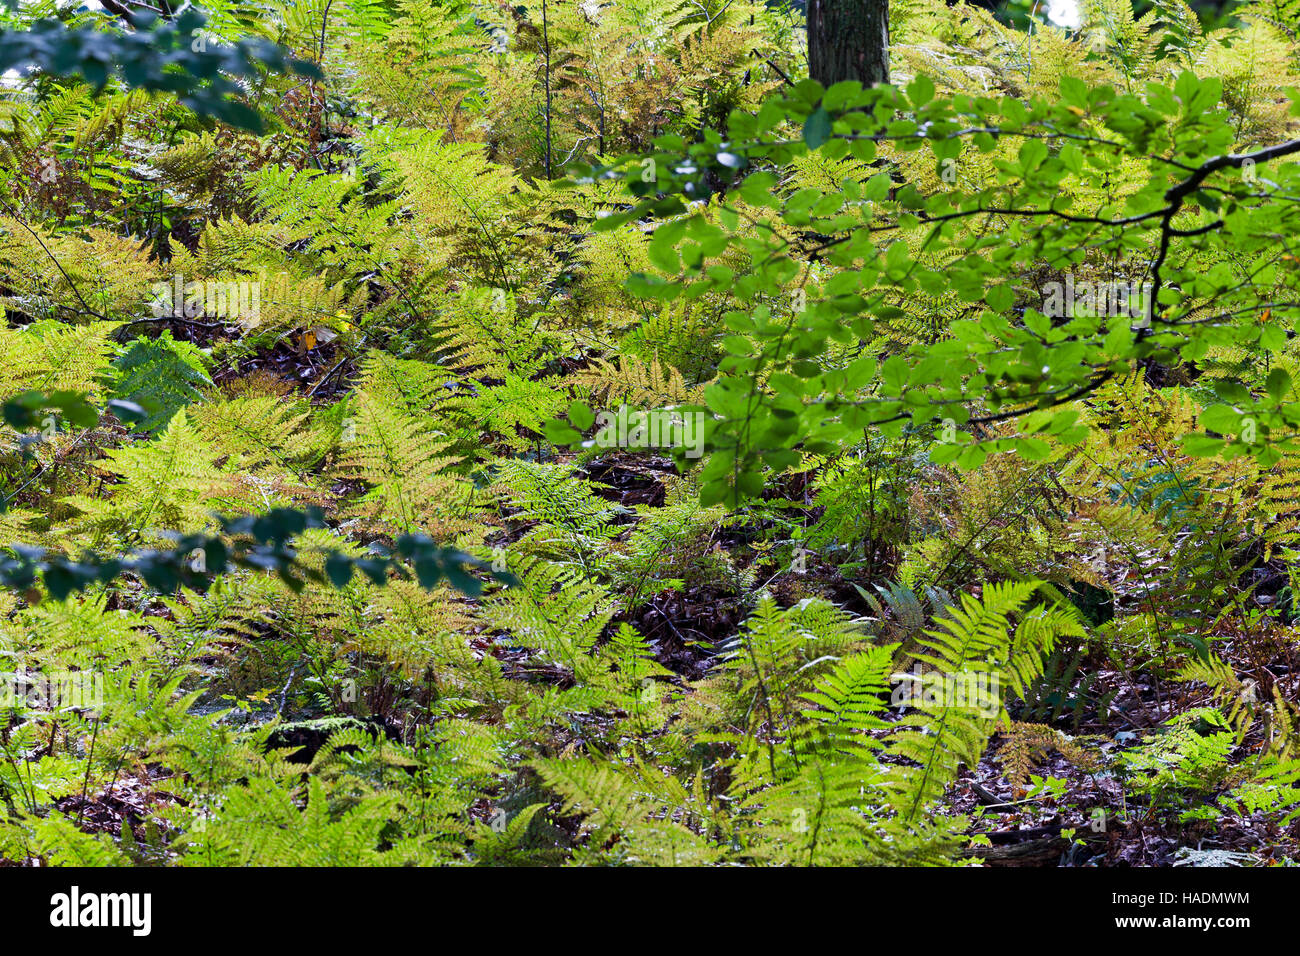 Broad Buckler Fern (Dryopteris dilatata) in autumnal forest. Germany Stock Photo